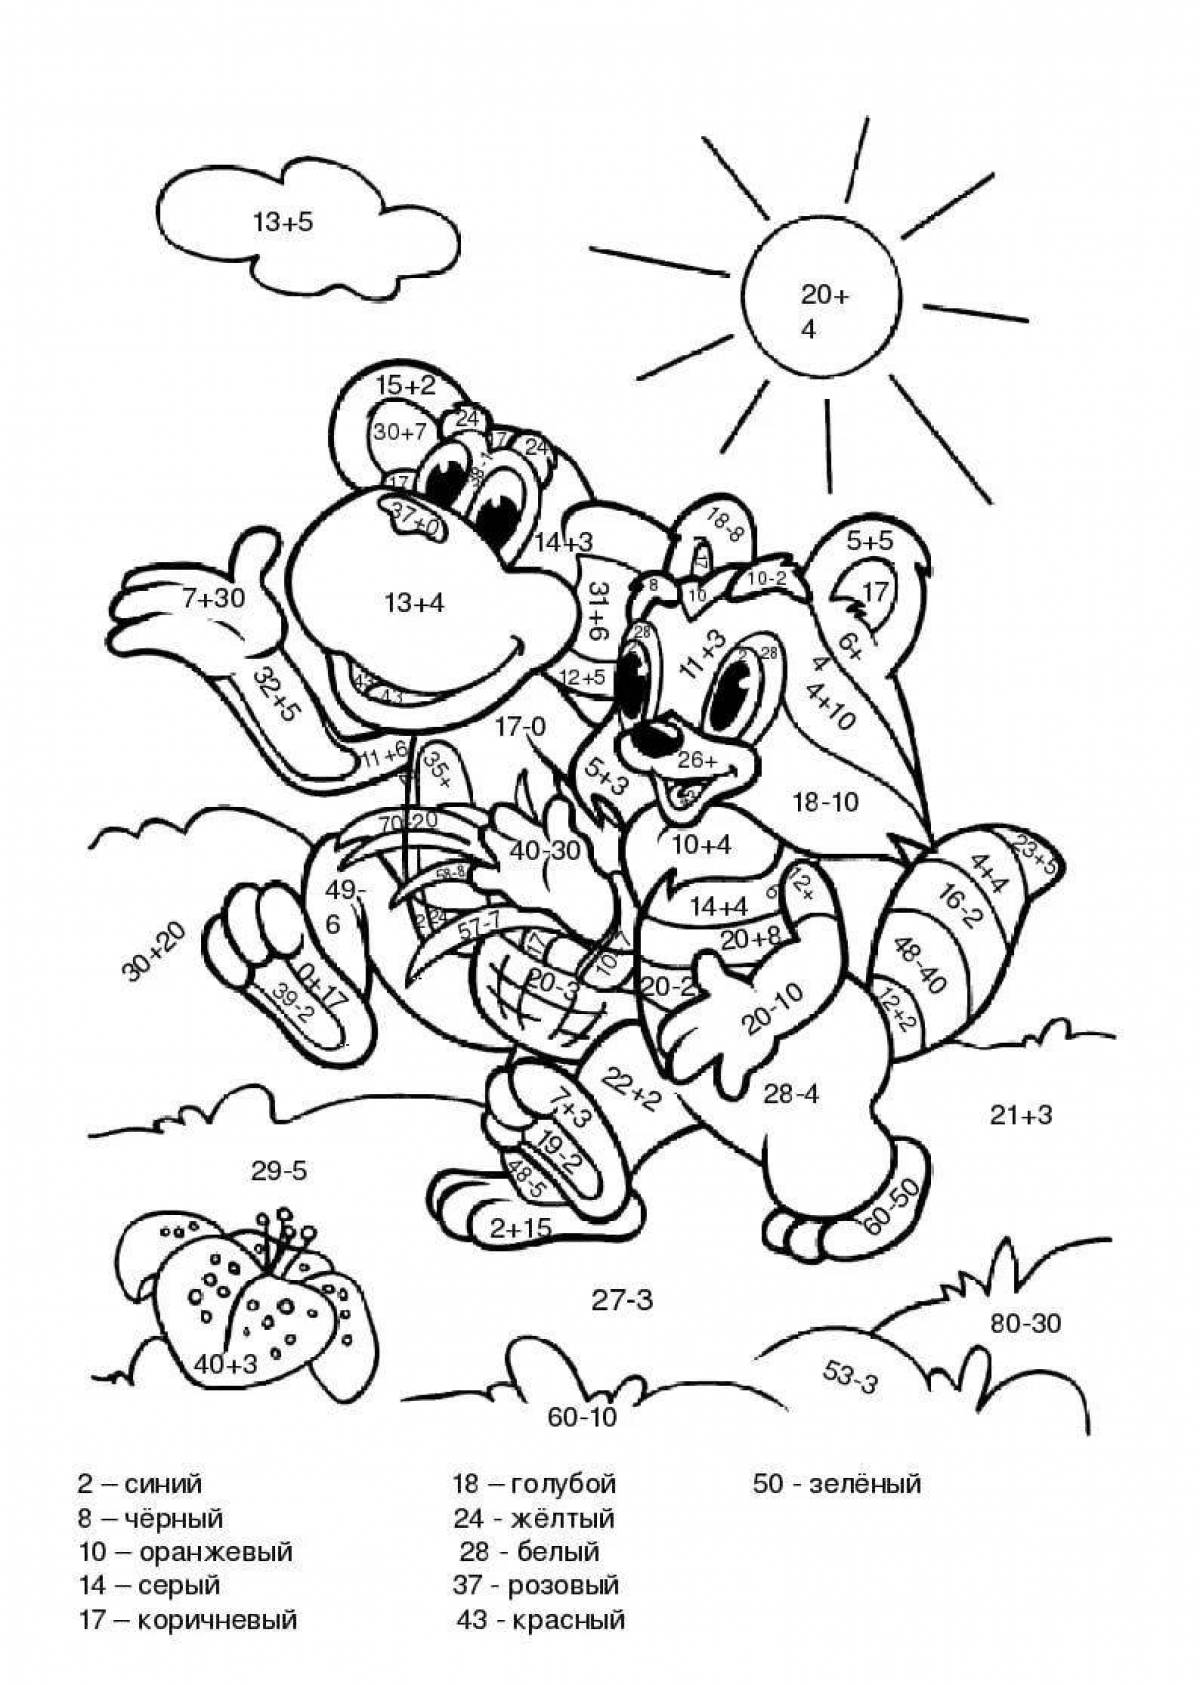 Adorable coloring book with 20 examples